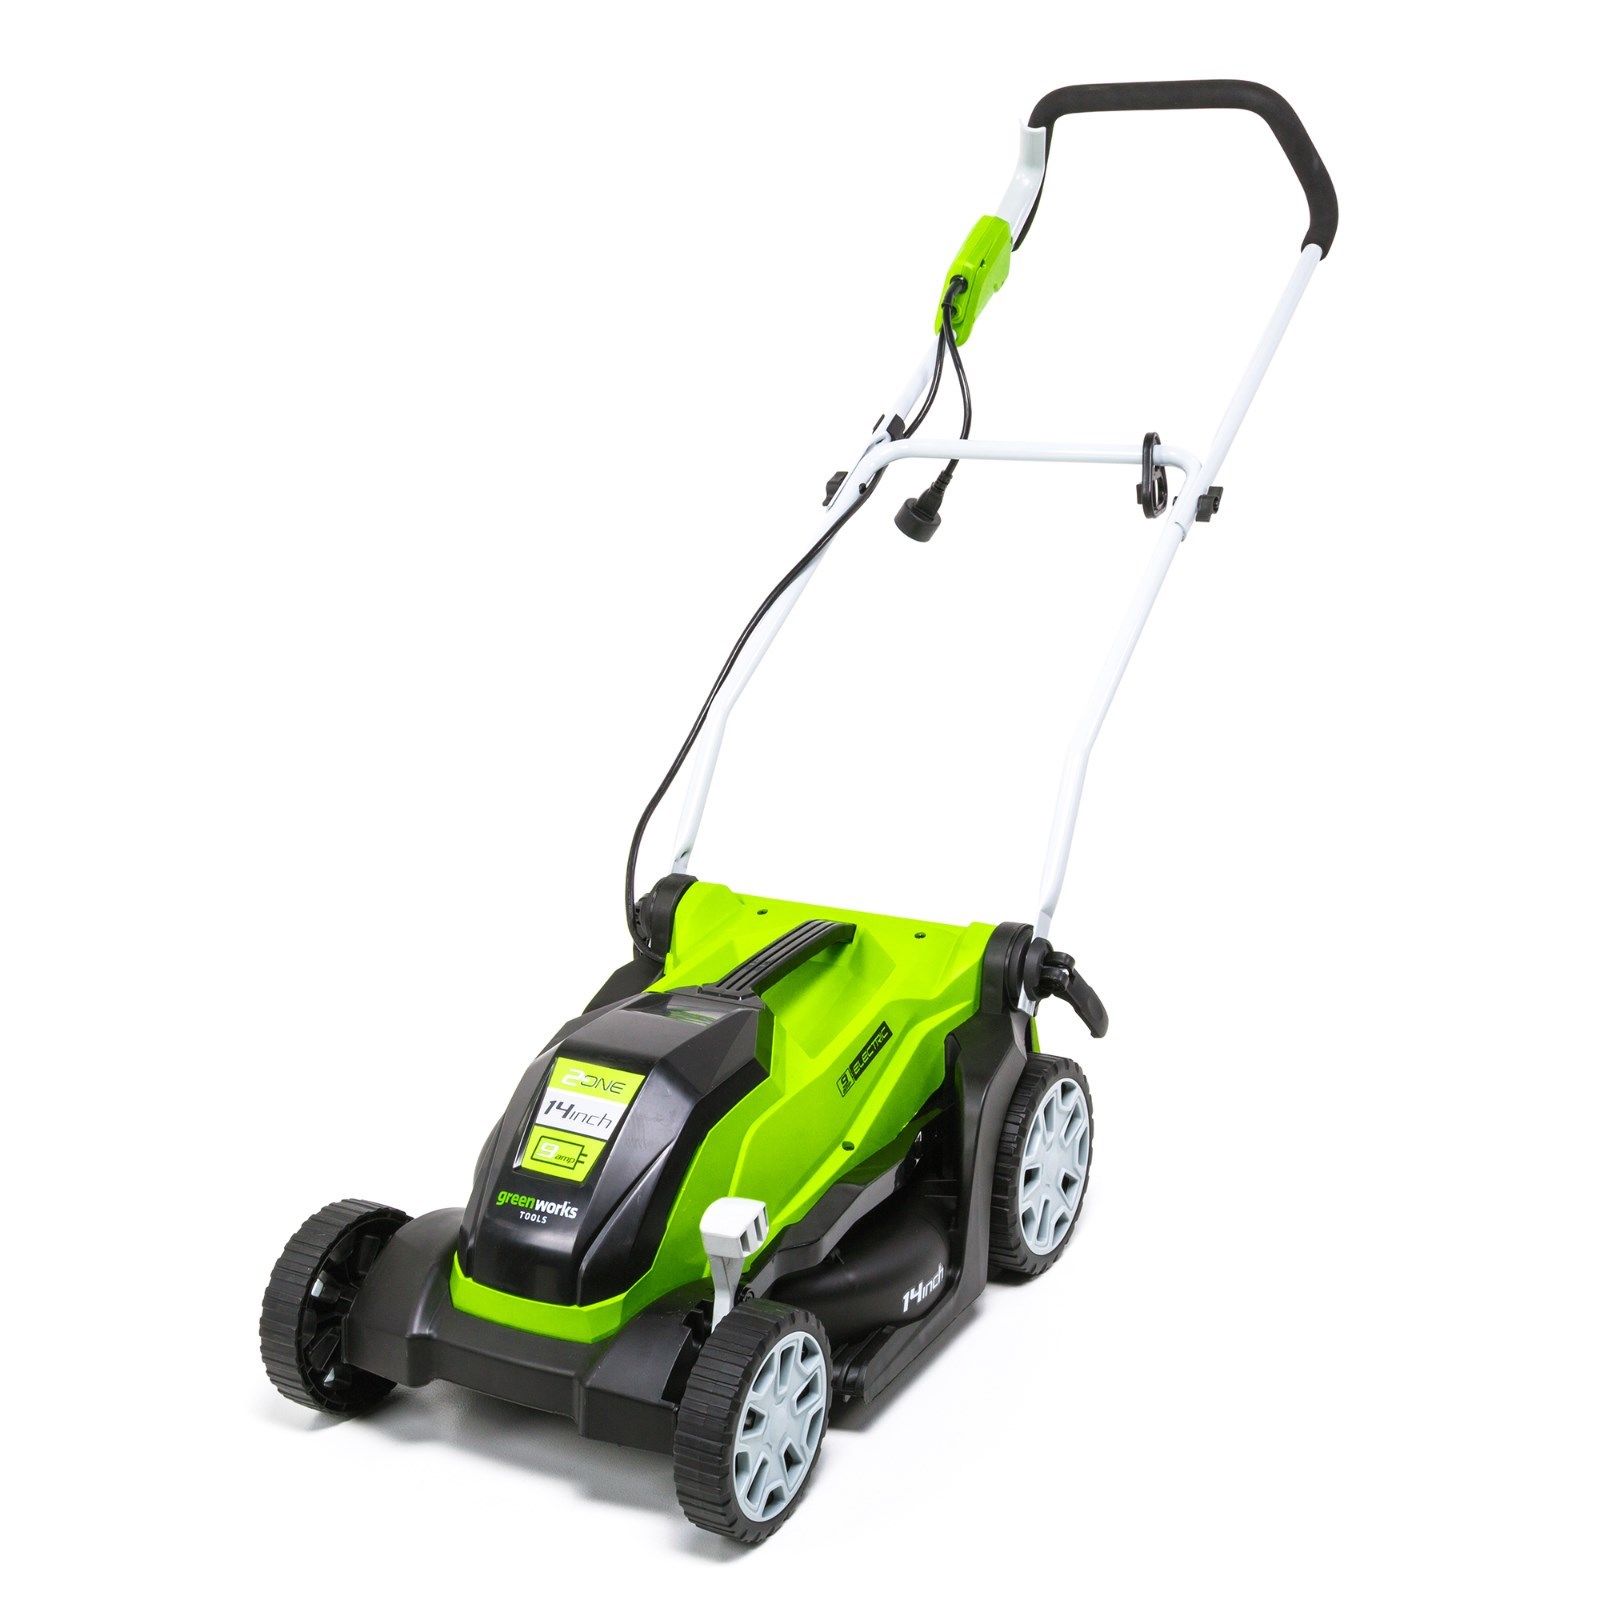 Greenworks corded electric 9 amp 14-inch lawn mower for $89